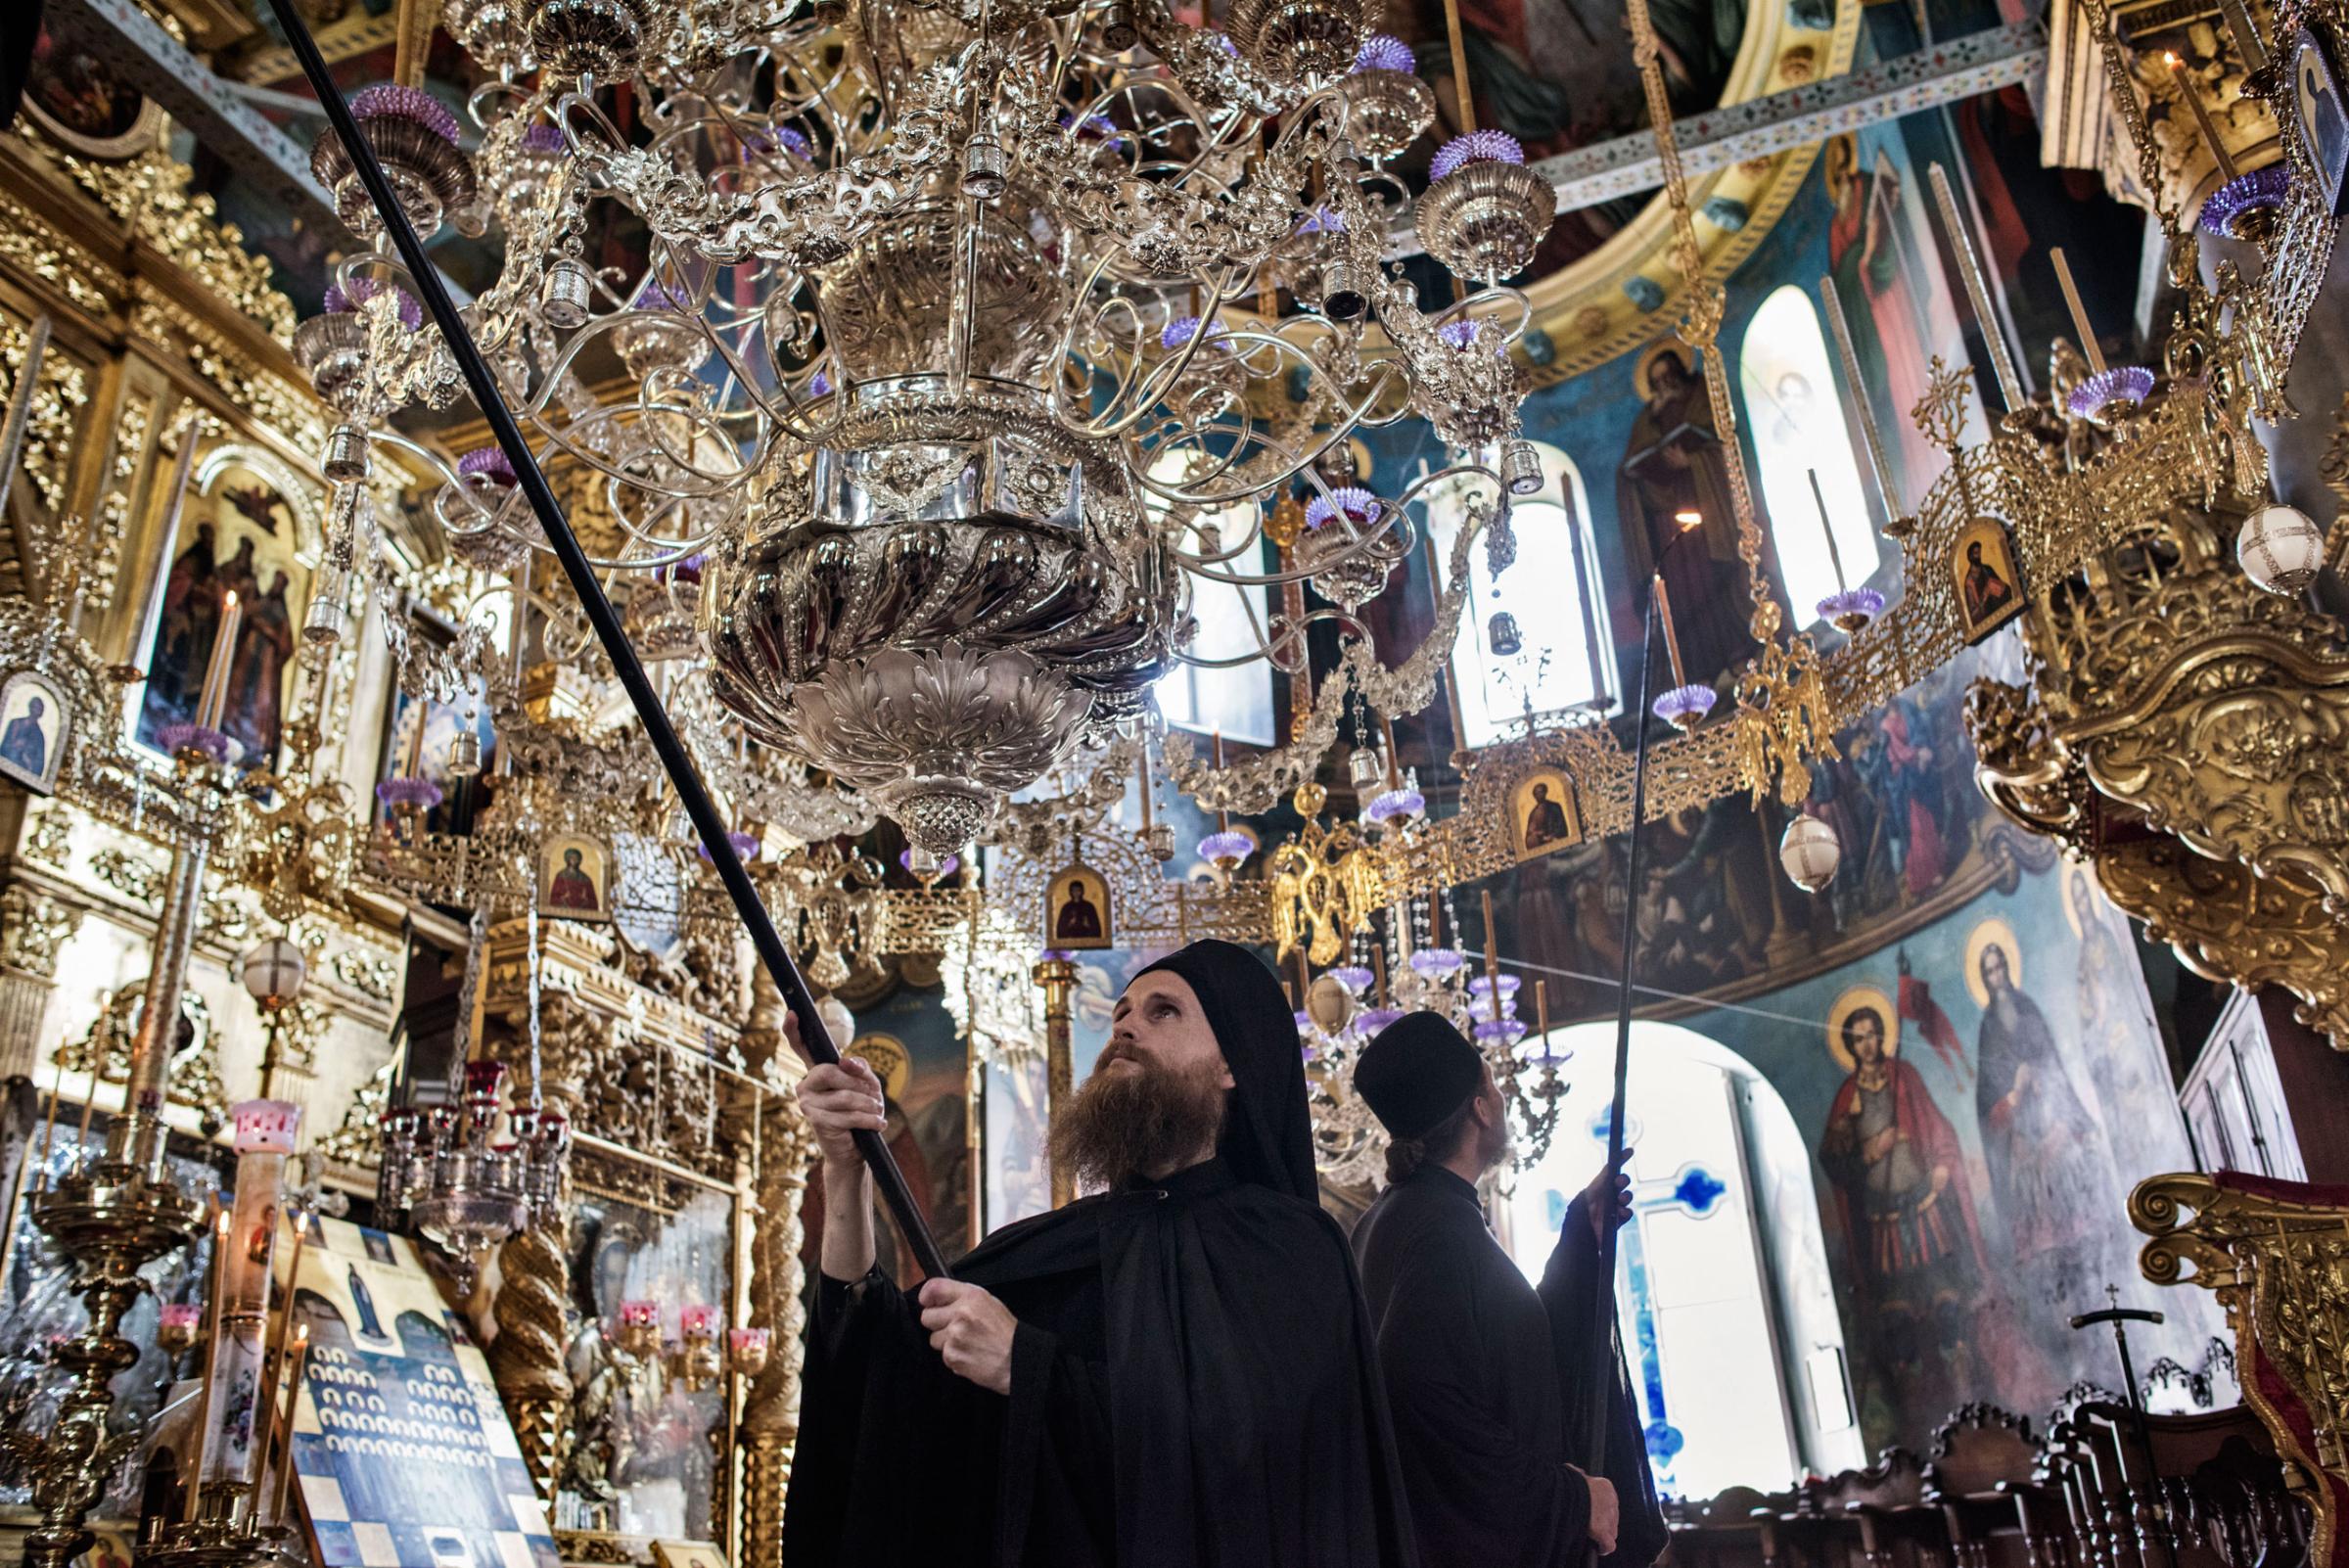 Russian Orthodox monks light candles in preparation for the arrival of Patriarch Kirill, the head of the Russian Orthodox Church, inside the Monastery of St. Panteleimon, otherwise known as Rossikon ("The Russian"), May 27, 2016.